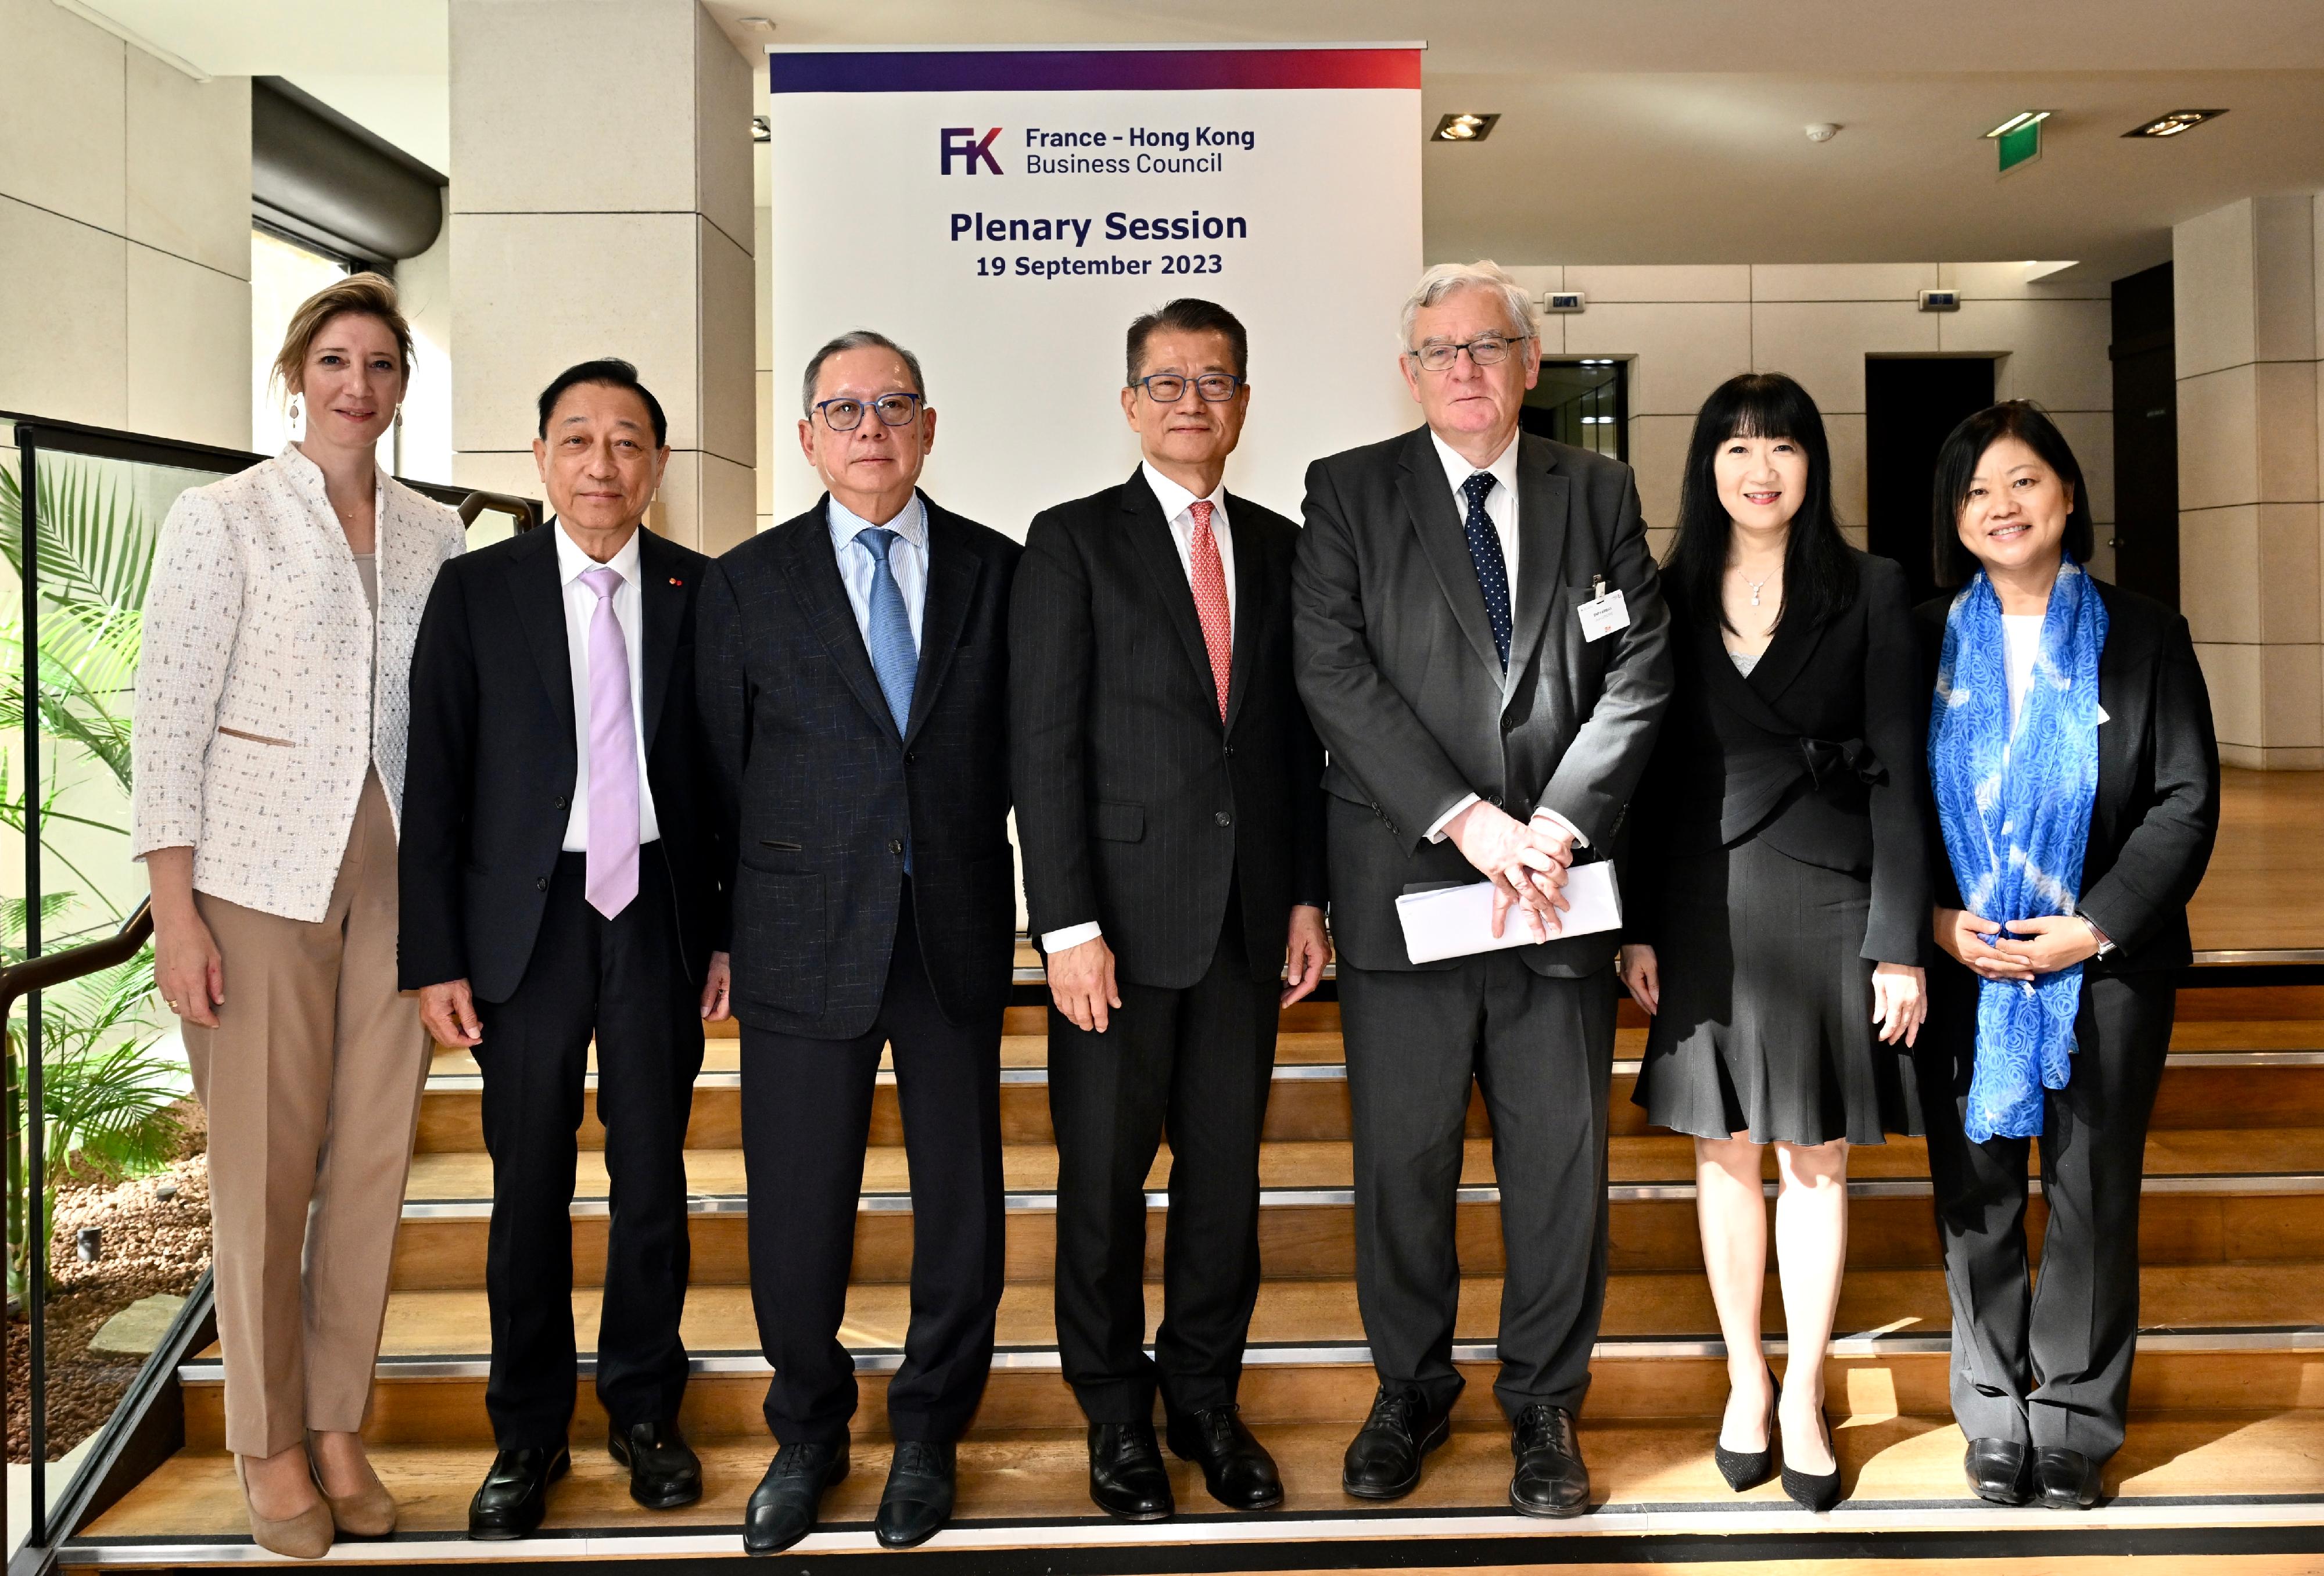 The Financial Secretary, Mr Paul Chan, continued to visit Paris, France, yesterday (September 19, Paris time). Photo shows Mr Chan (centre) meeting with the Hong Kong Chairman of the Hong Kong-France Business Council, Mr William Doo (second left); the Chairman of the Hong Kong Trade Development Council, Dr Peter Lam (third left); the French Chairman of the Hong Kong-France Business Council, Mr Jean Lemierre (third right); the Consul General of France in Hong Kong and Macau, Mrs Christile Drulhe (first left); and other attendees, before attending the Hong Kong-France Business Council Meeting.